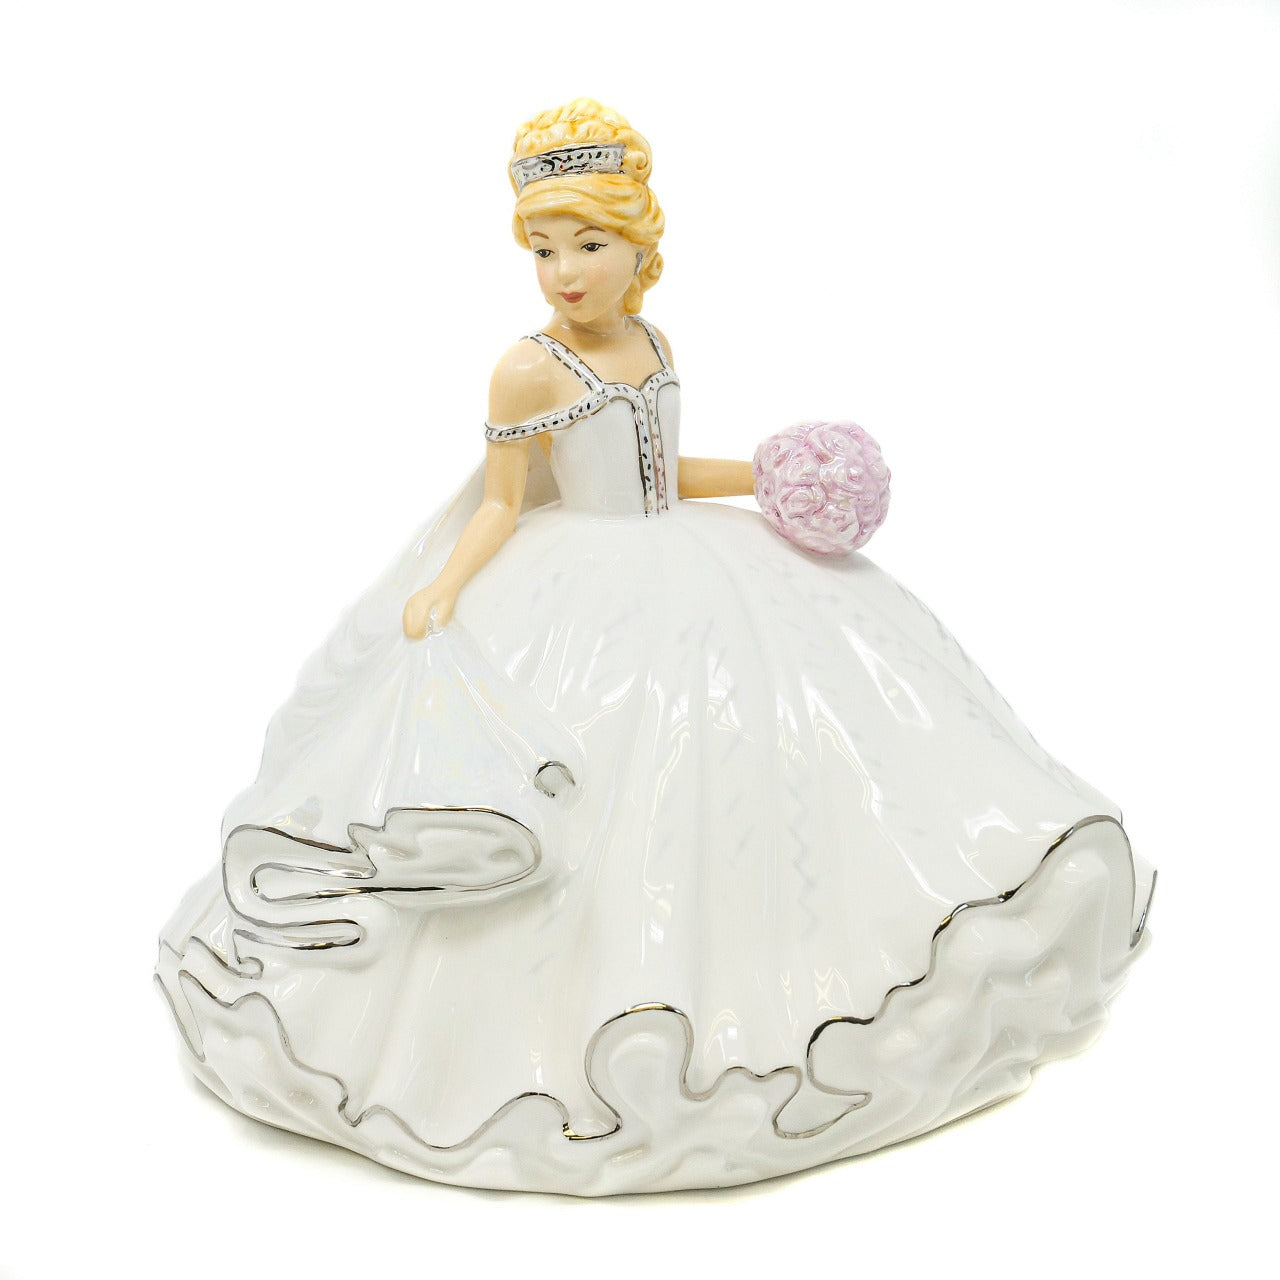 English Ladies Mini Bride of the Year Blonde  This figurine is the Mini version of the very popular Thelma Madine Bride of the Year. Standing at approximately 20cm tall the Mini Bride of the Year Blonde is dressed in a beautiful gown decorated in Mother of Pearl Lustre and real platinum highlights.